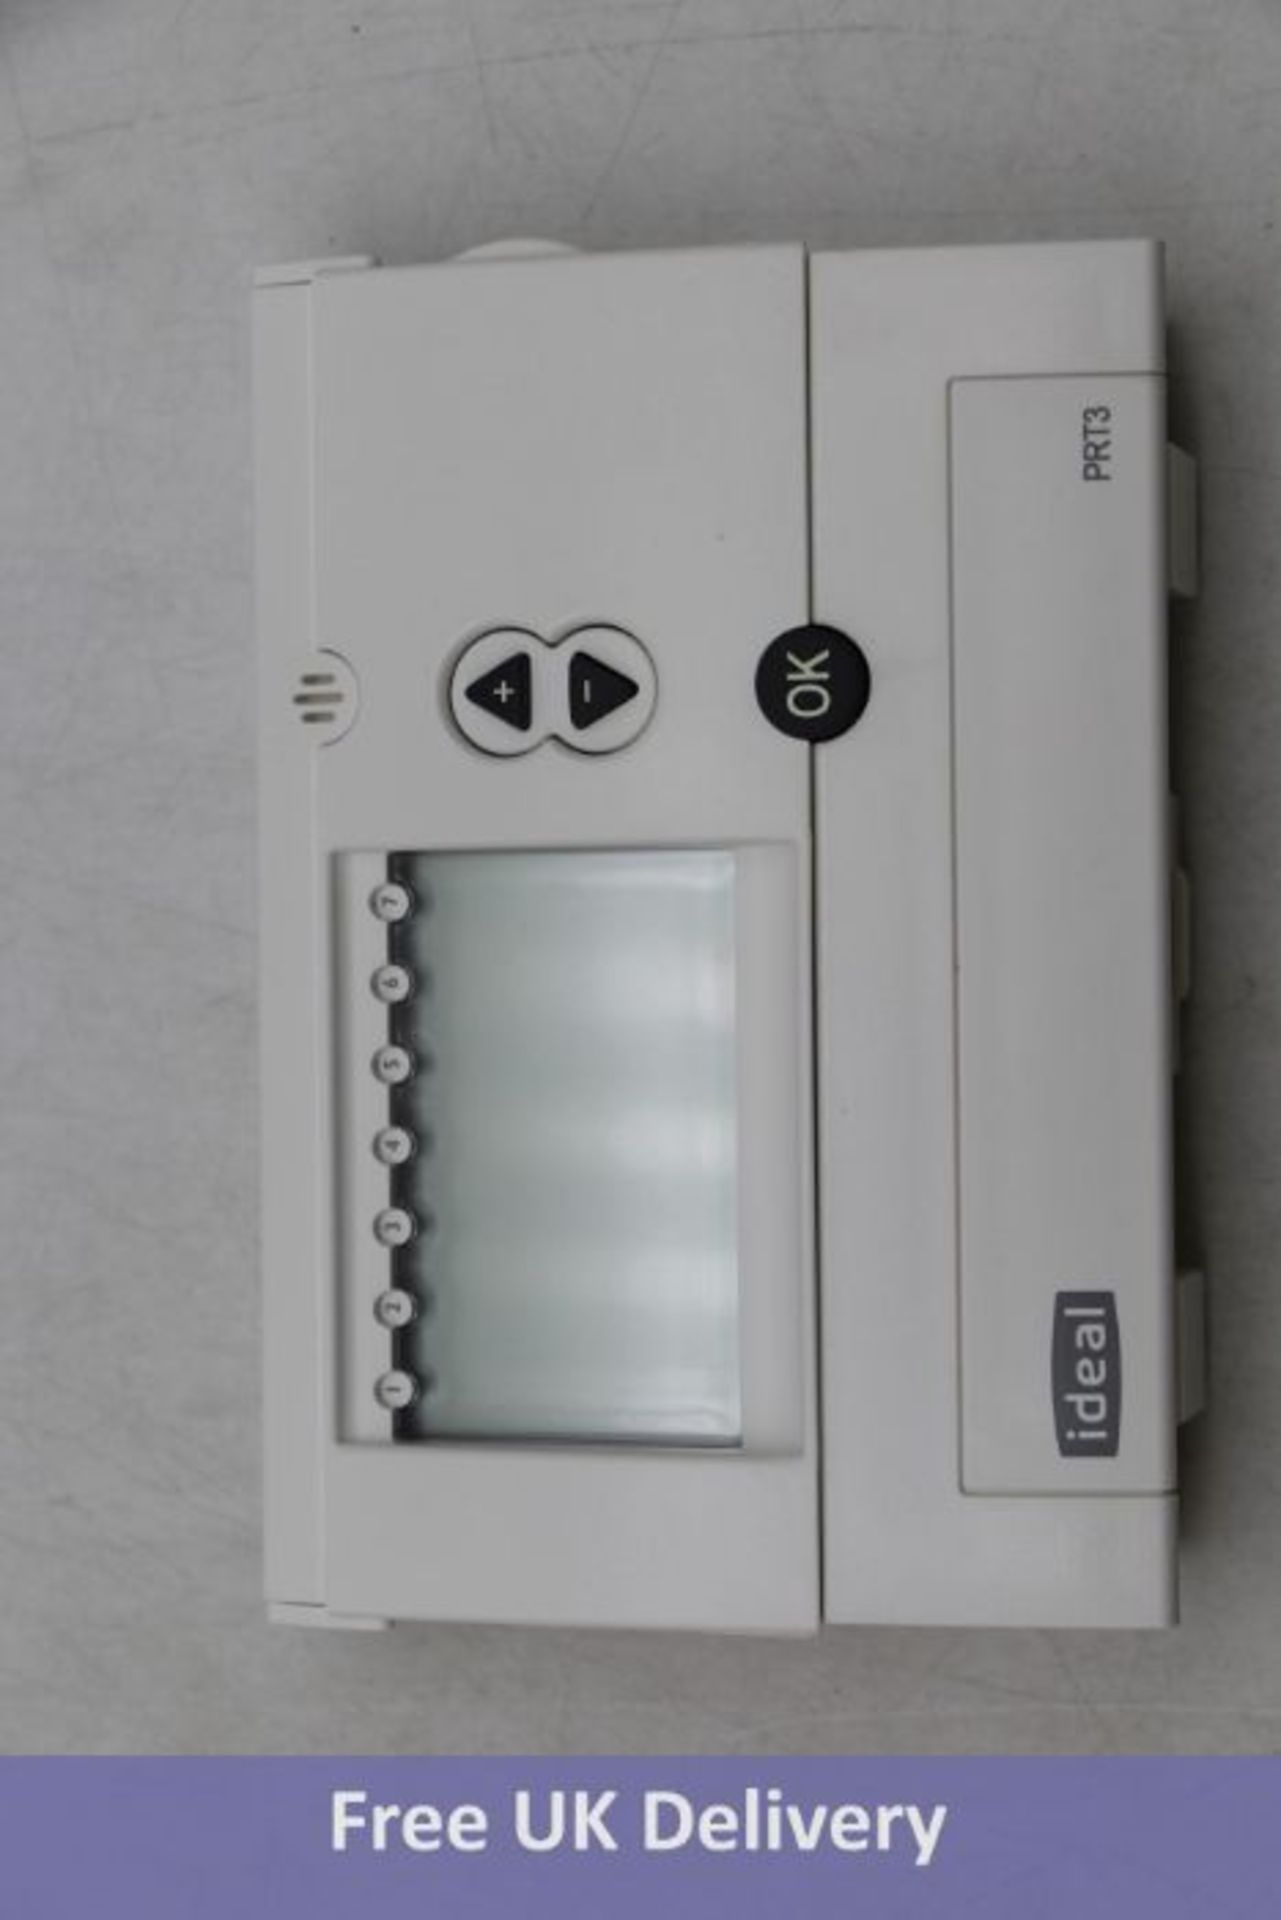 Ideal RF Electronic Programmable Room Thermostat